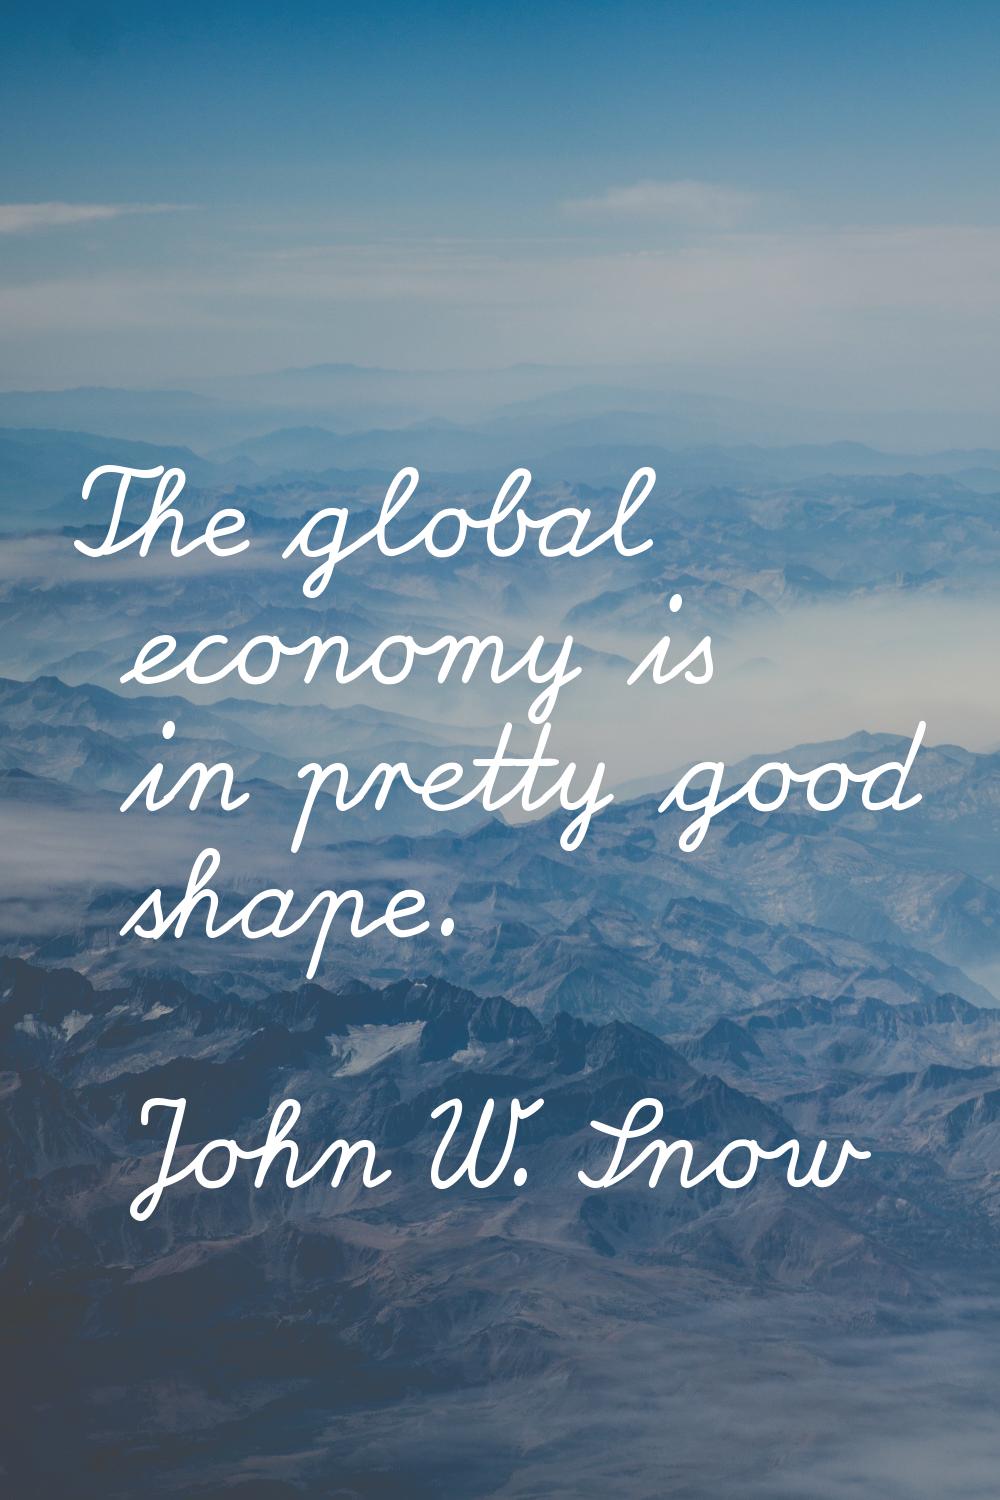 The global economy is in pretty good shape.